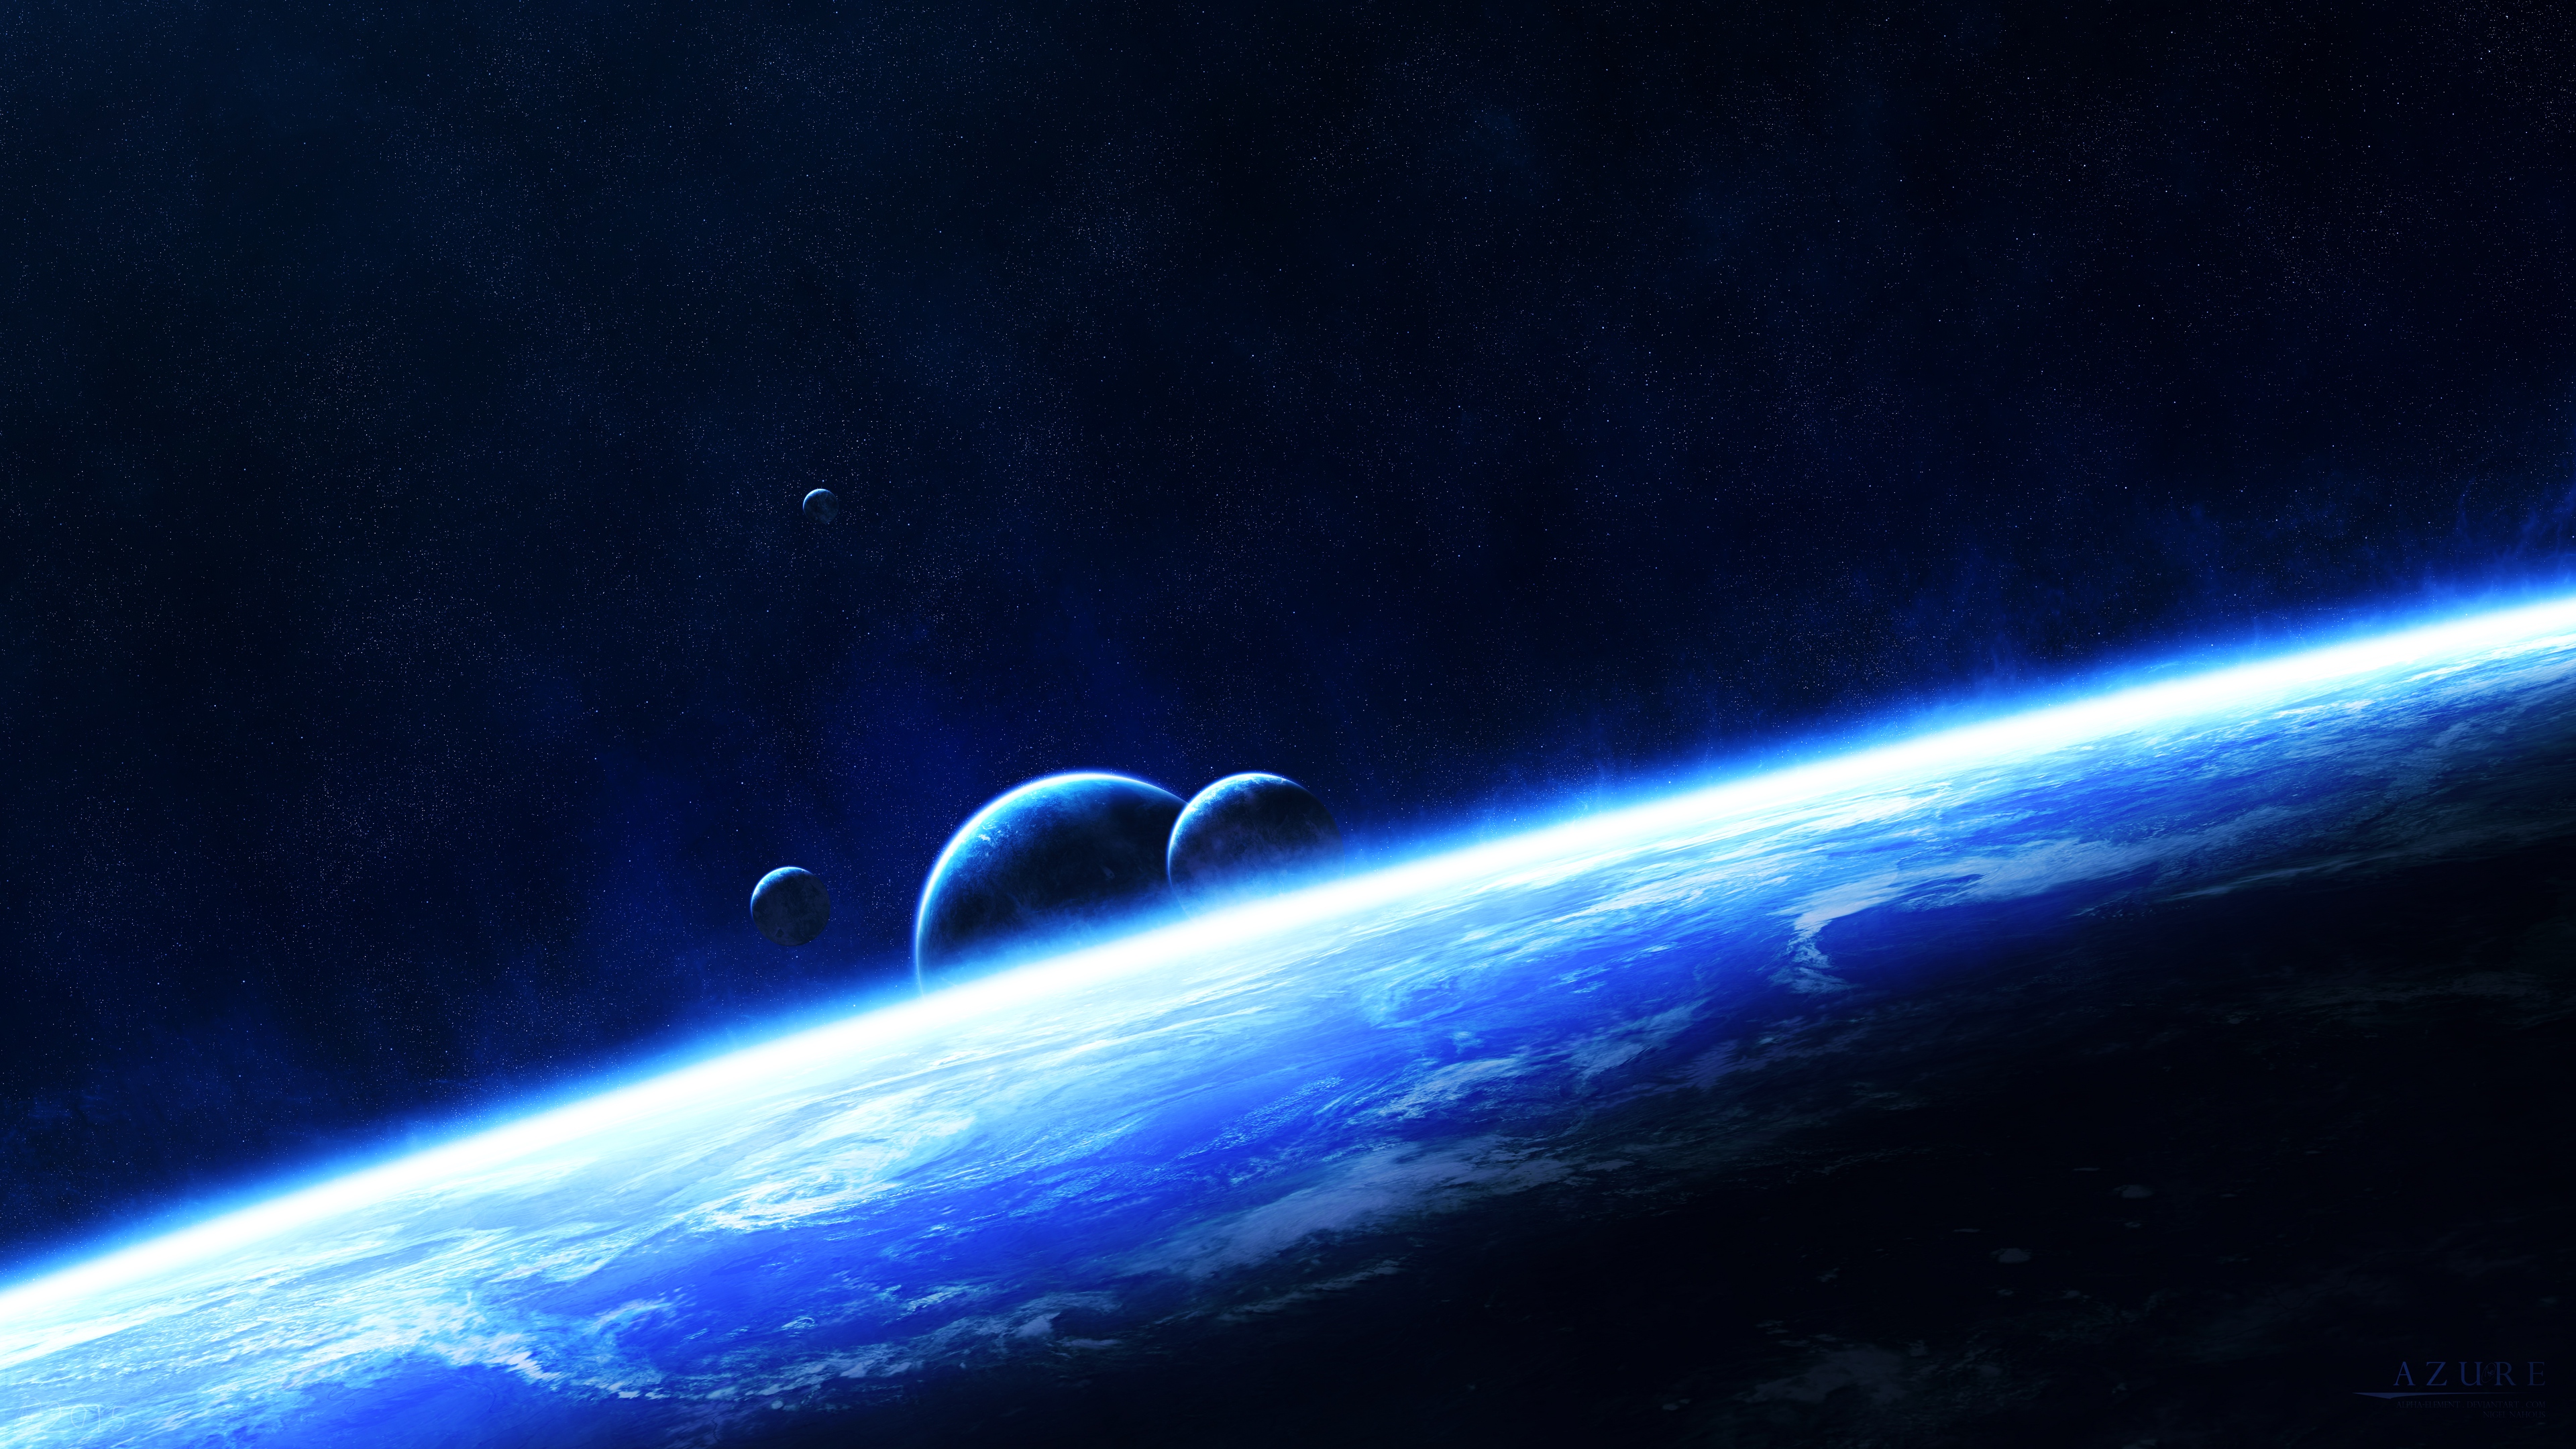 Wallpaper Planets, Space, Glow, Universe - Space Universe Wallpaper 4k - HD Wallpaper 